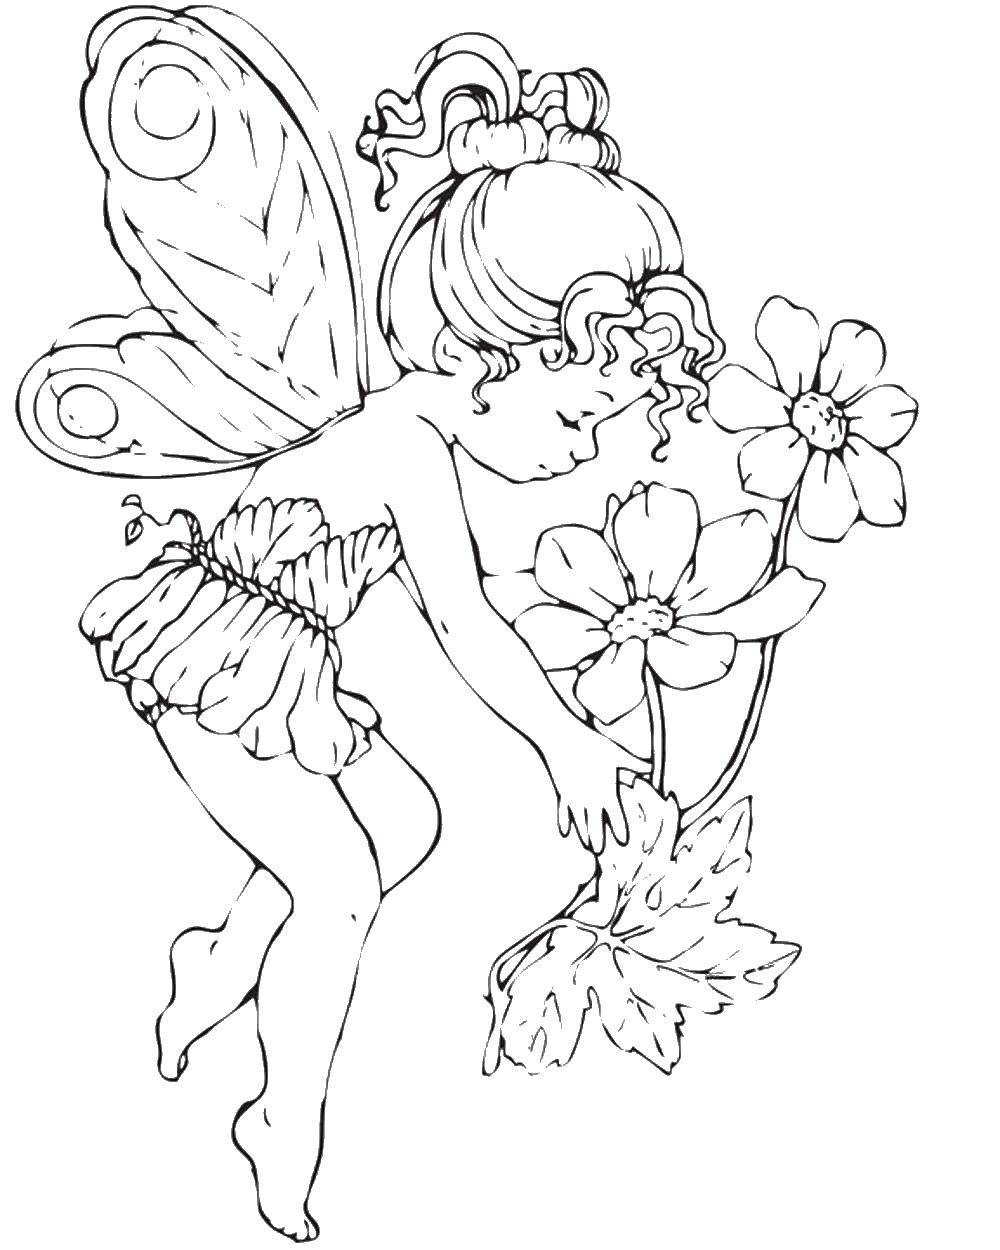 Coloring Little fairy with a flower. Category fairies. Tags:  fairies, flowers.